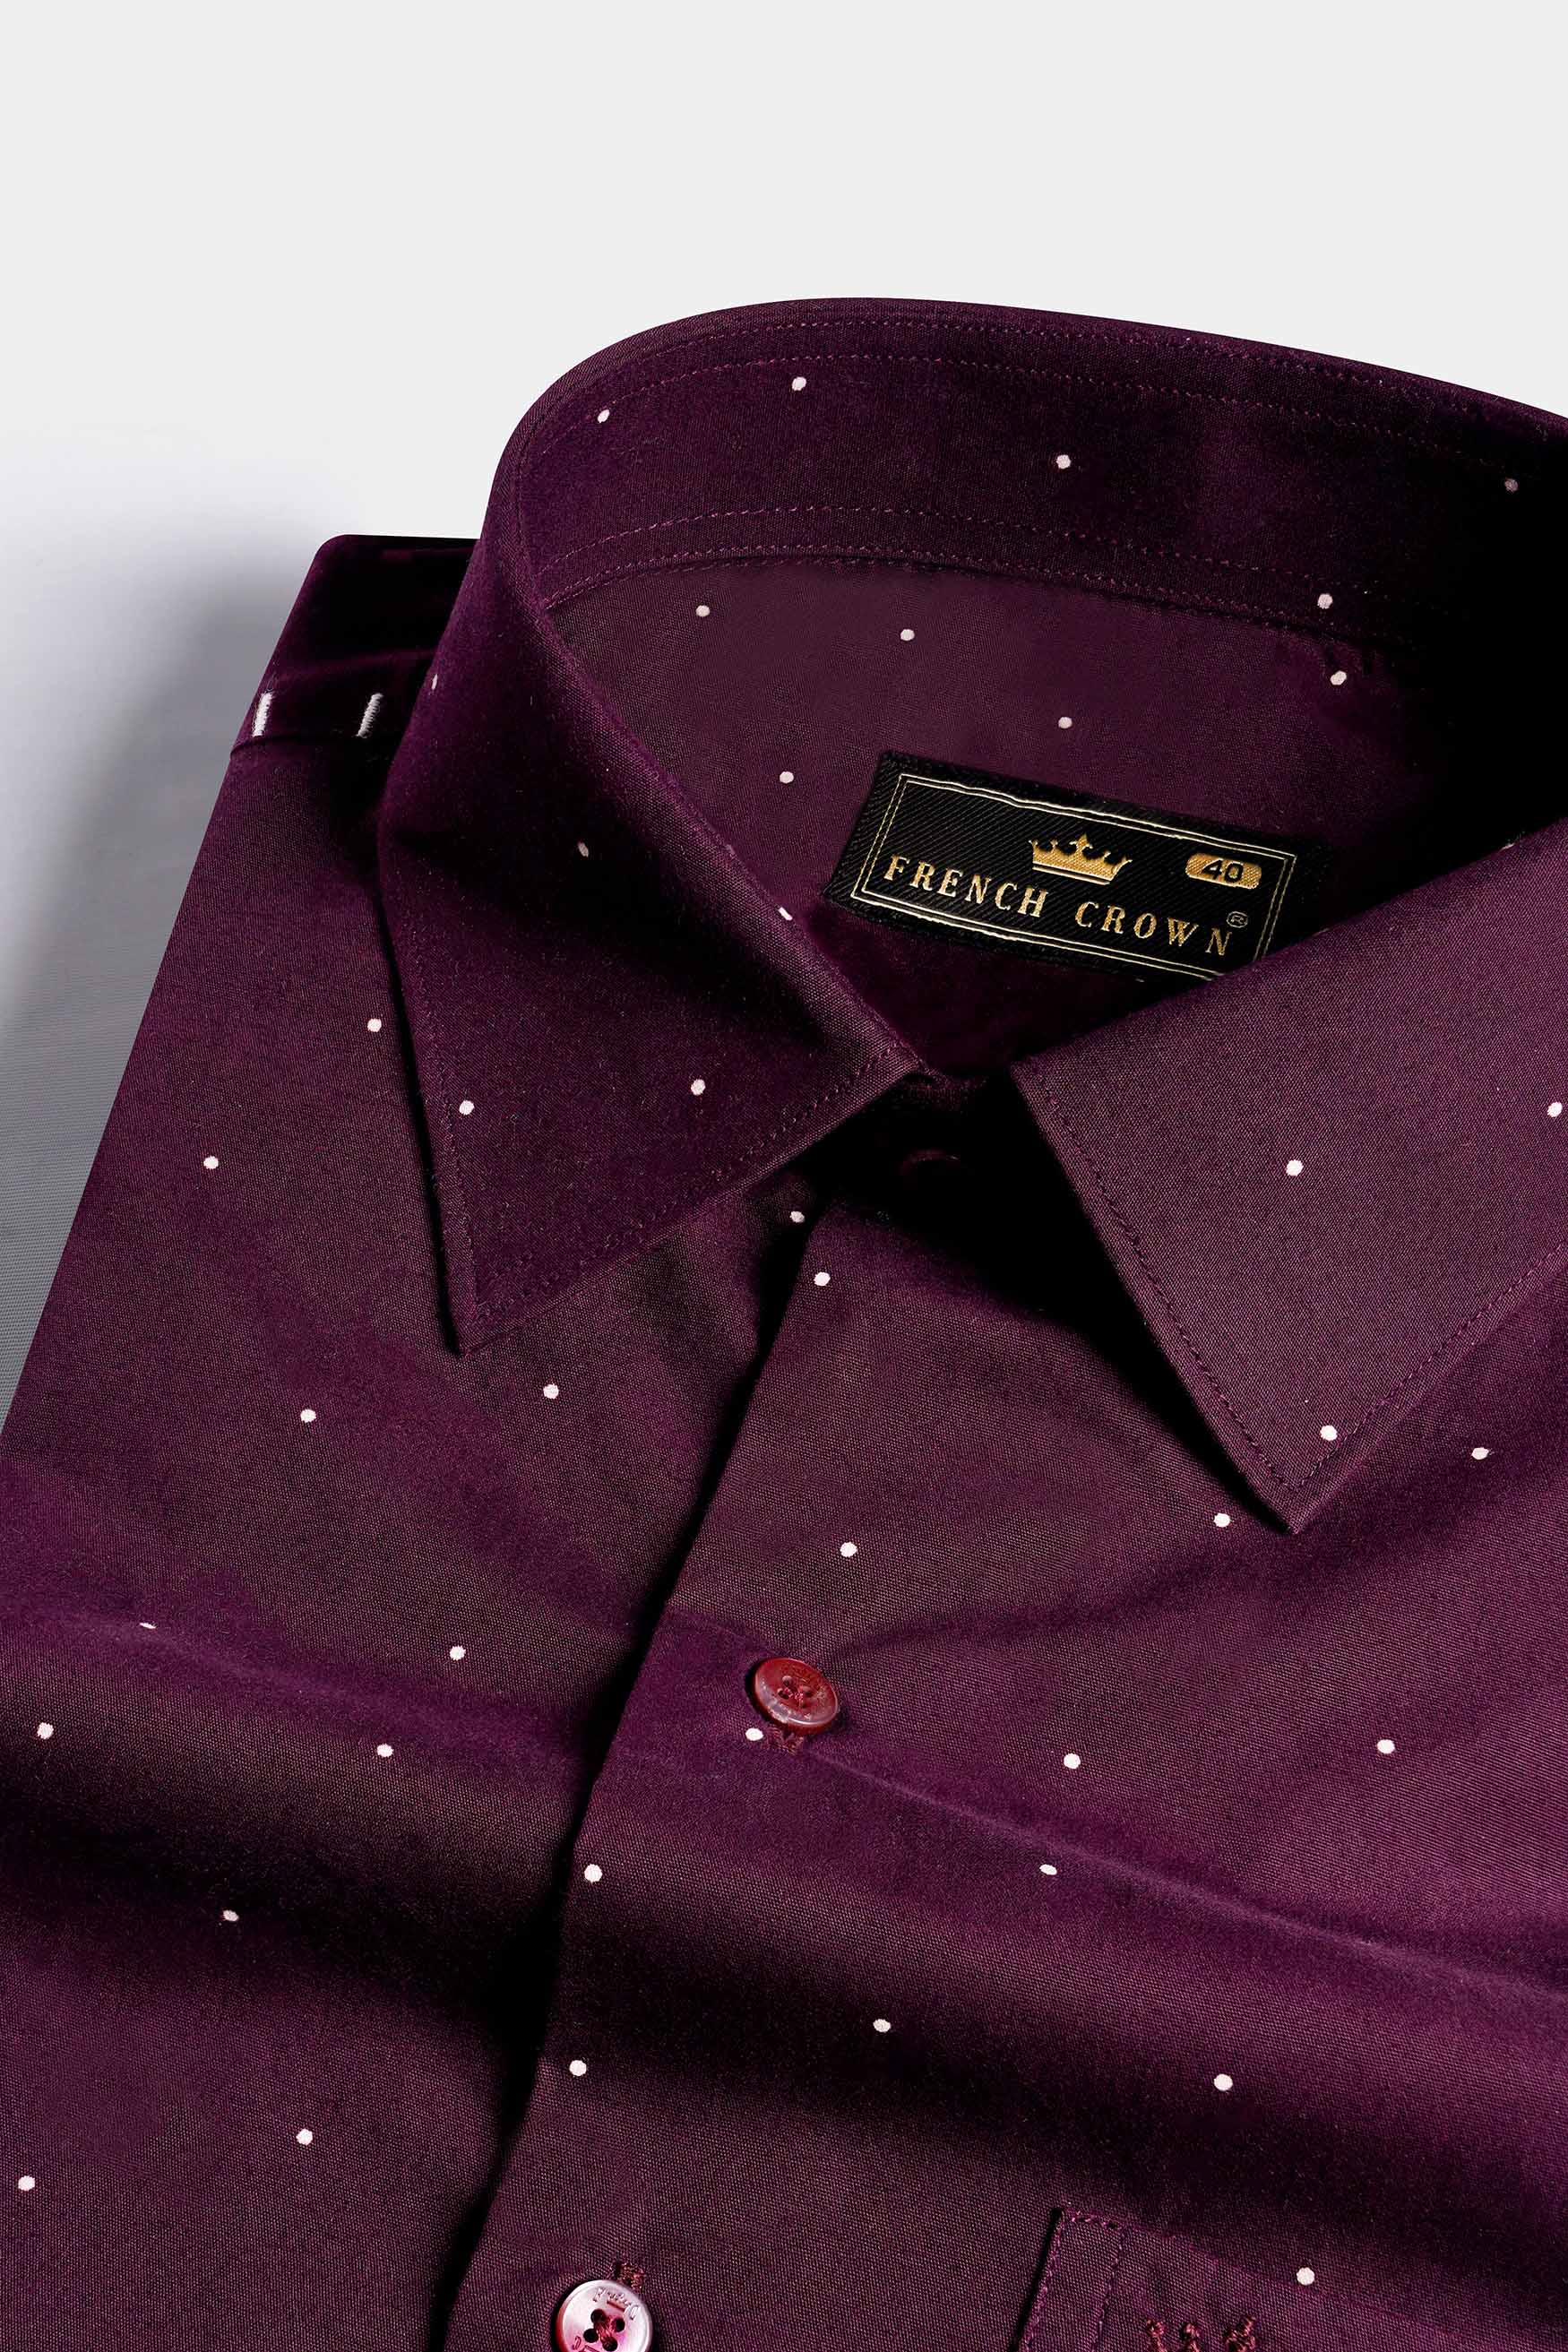 Eggplant Wine with White Dotted Twill Premium Cotton Shirt